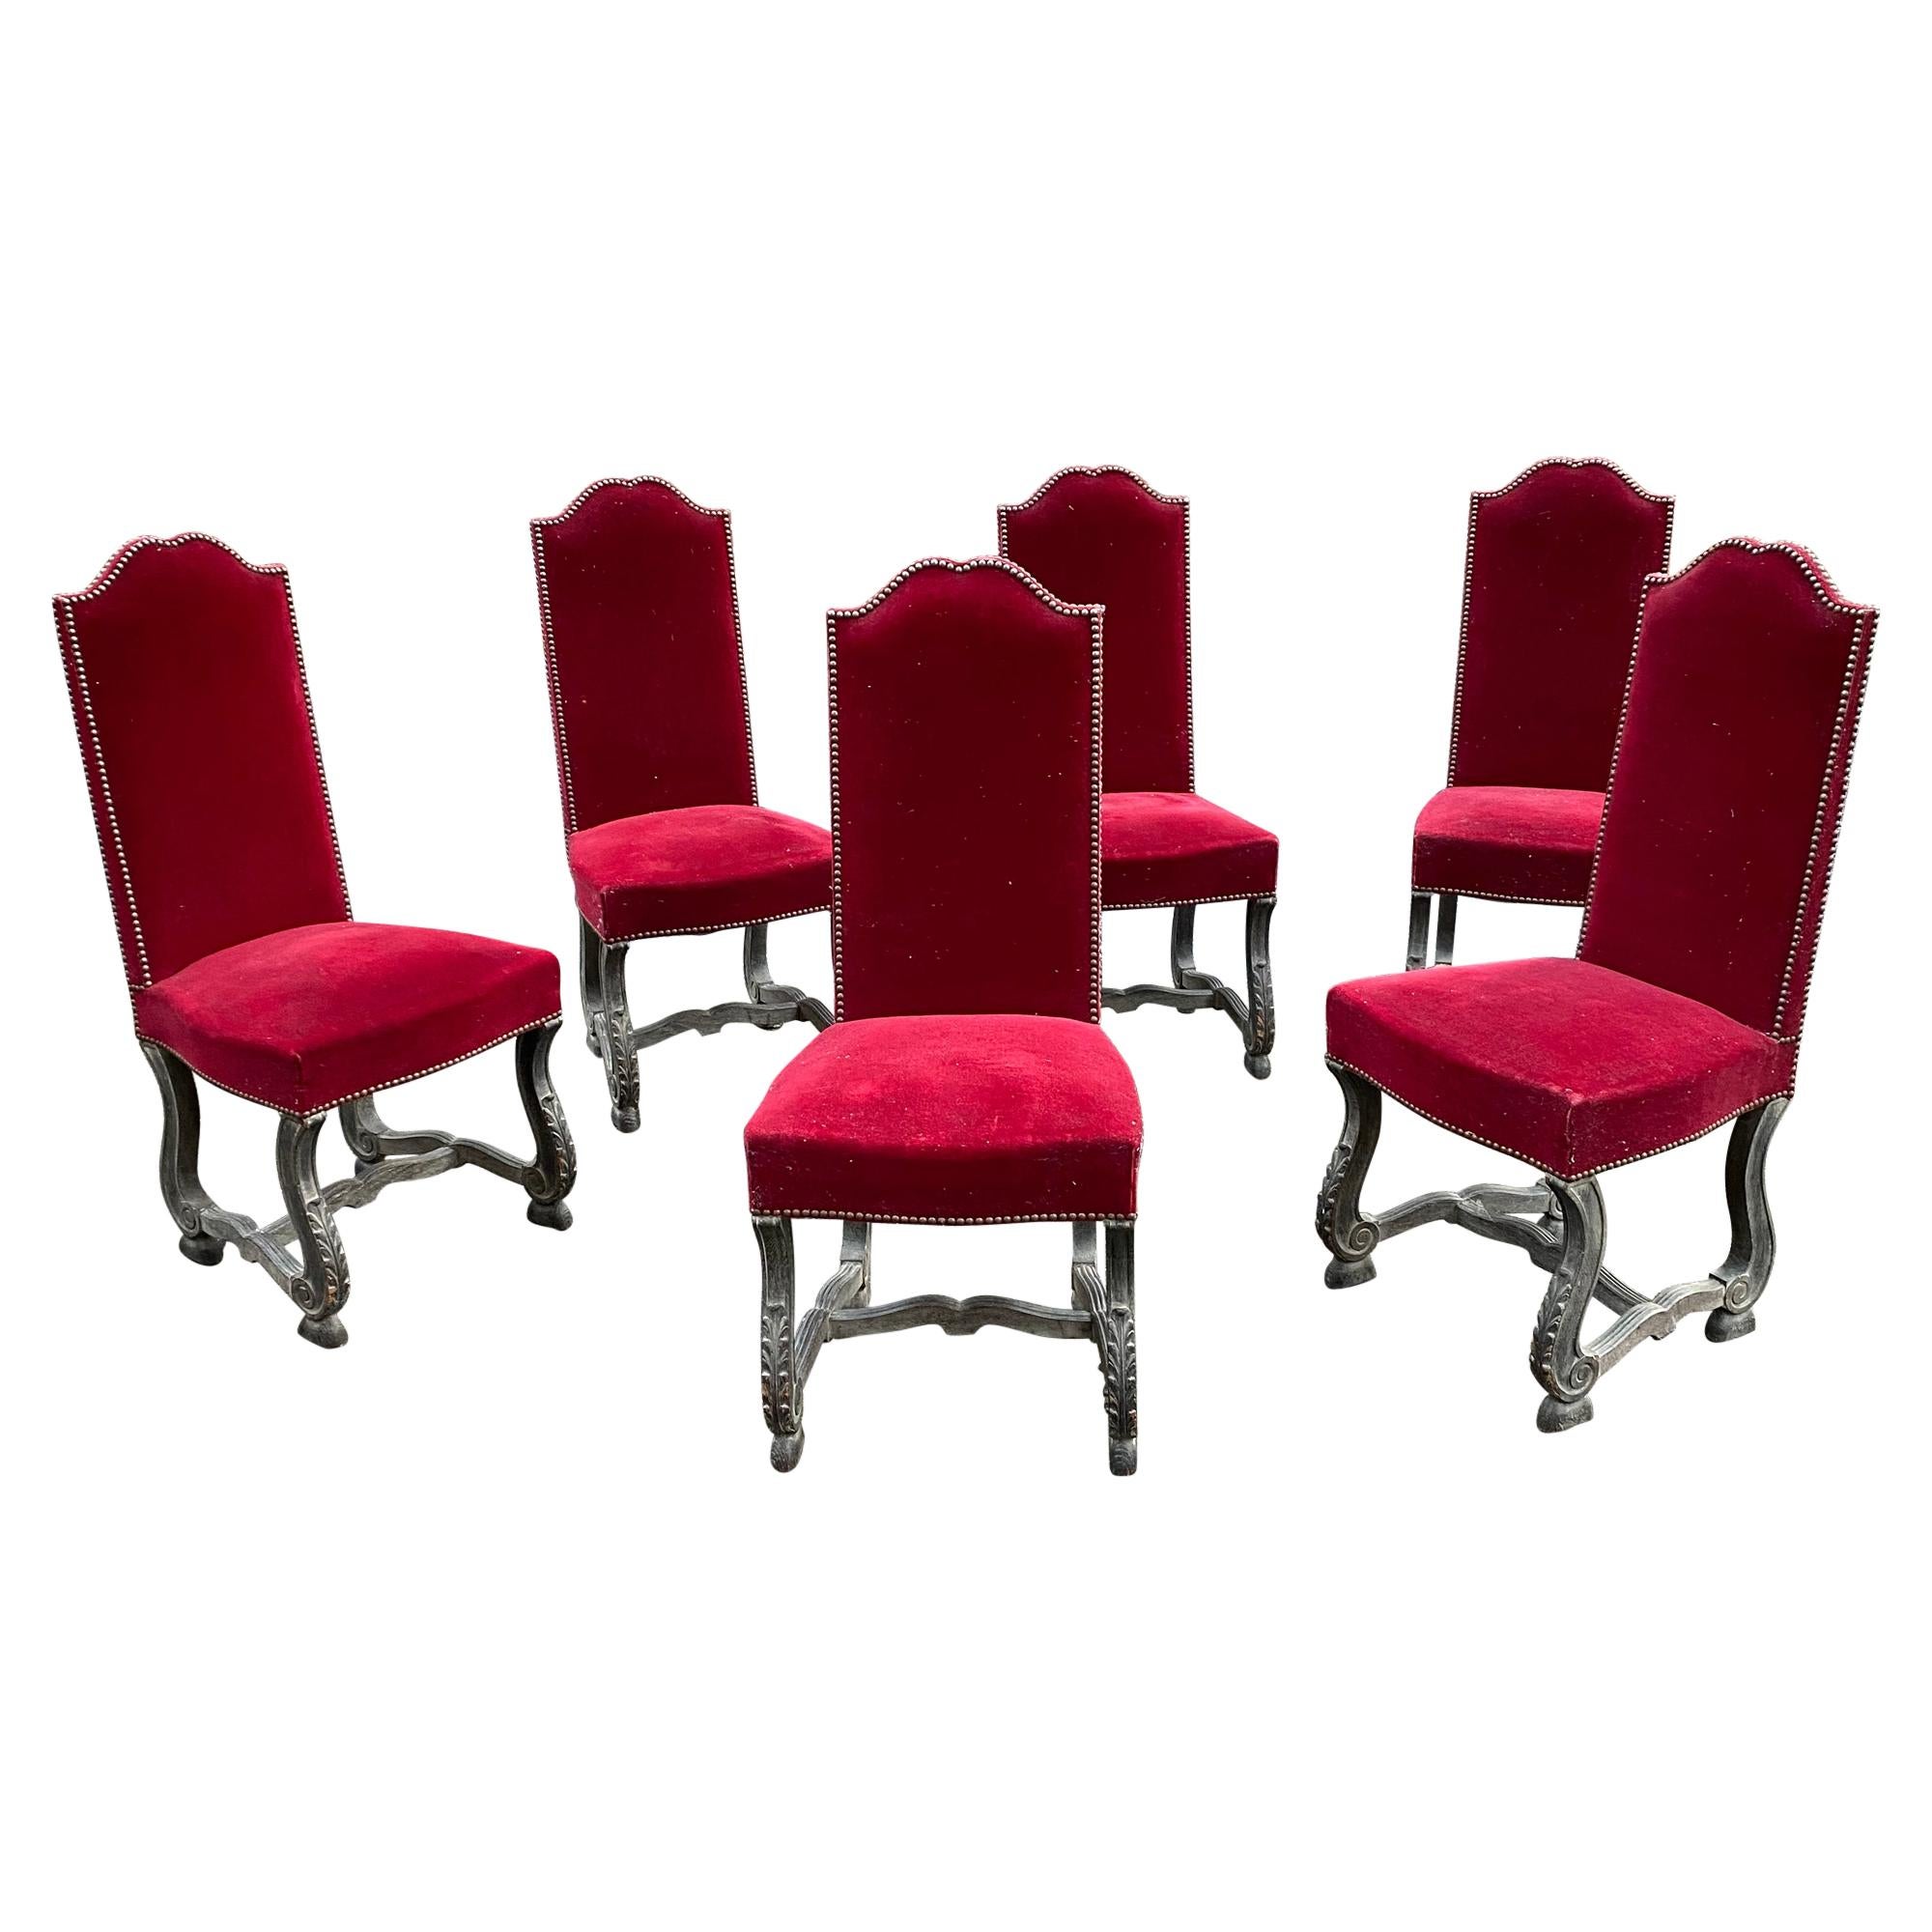 6 Neoclassic Chairs in Blackened and Ceruse Oak, circa 1940-1950